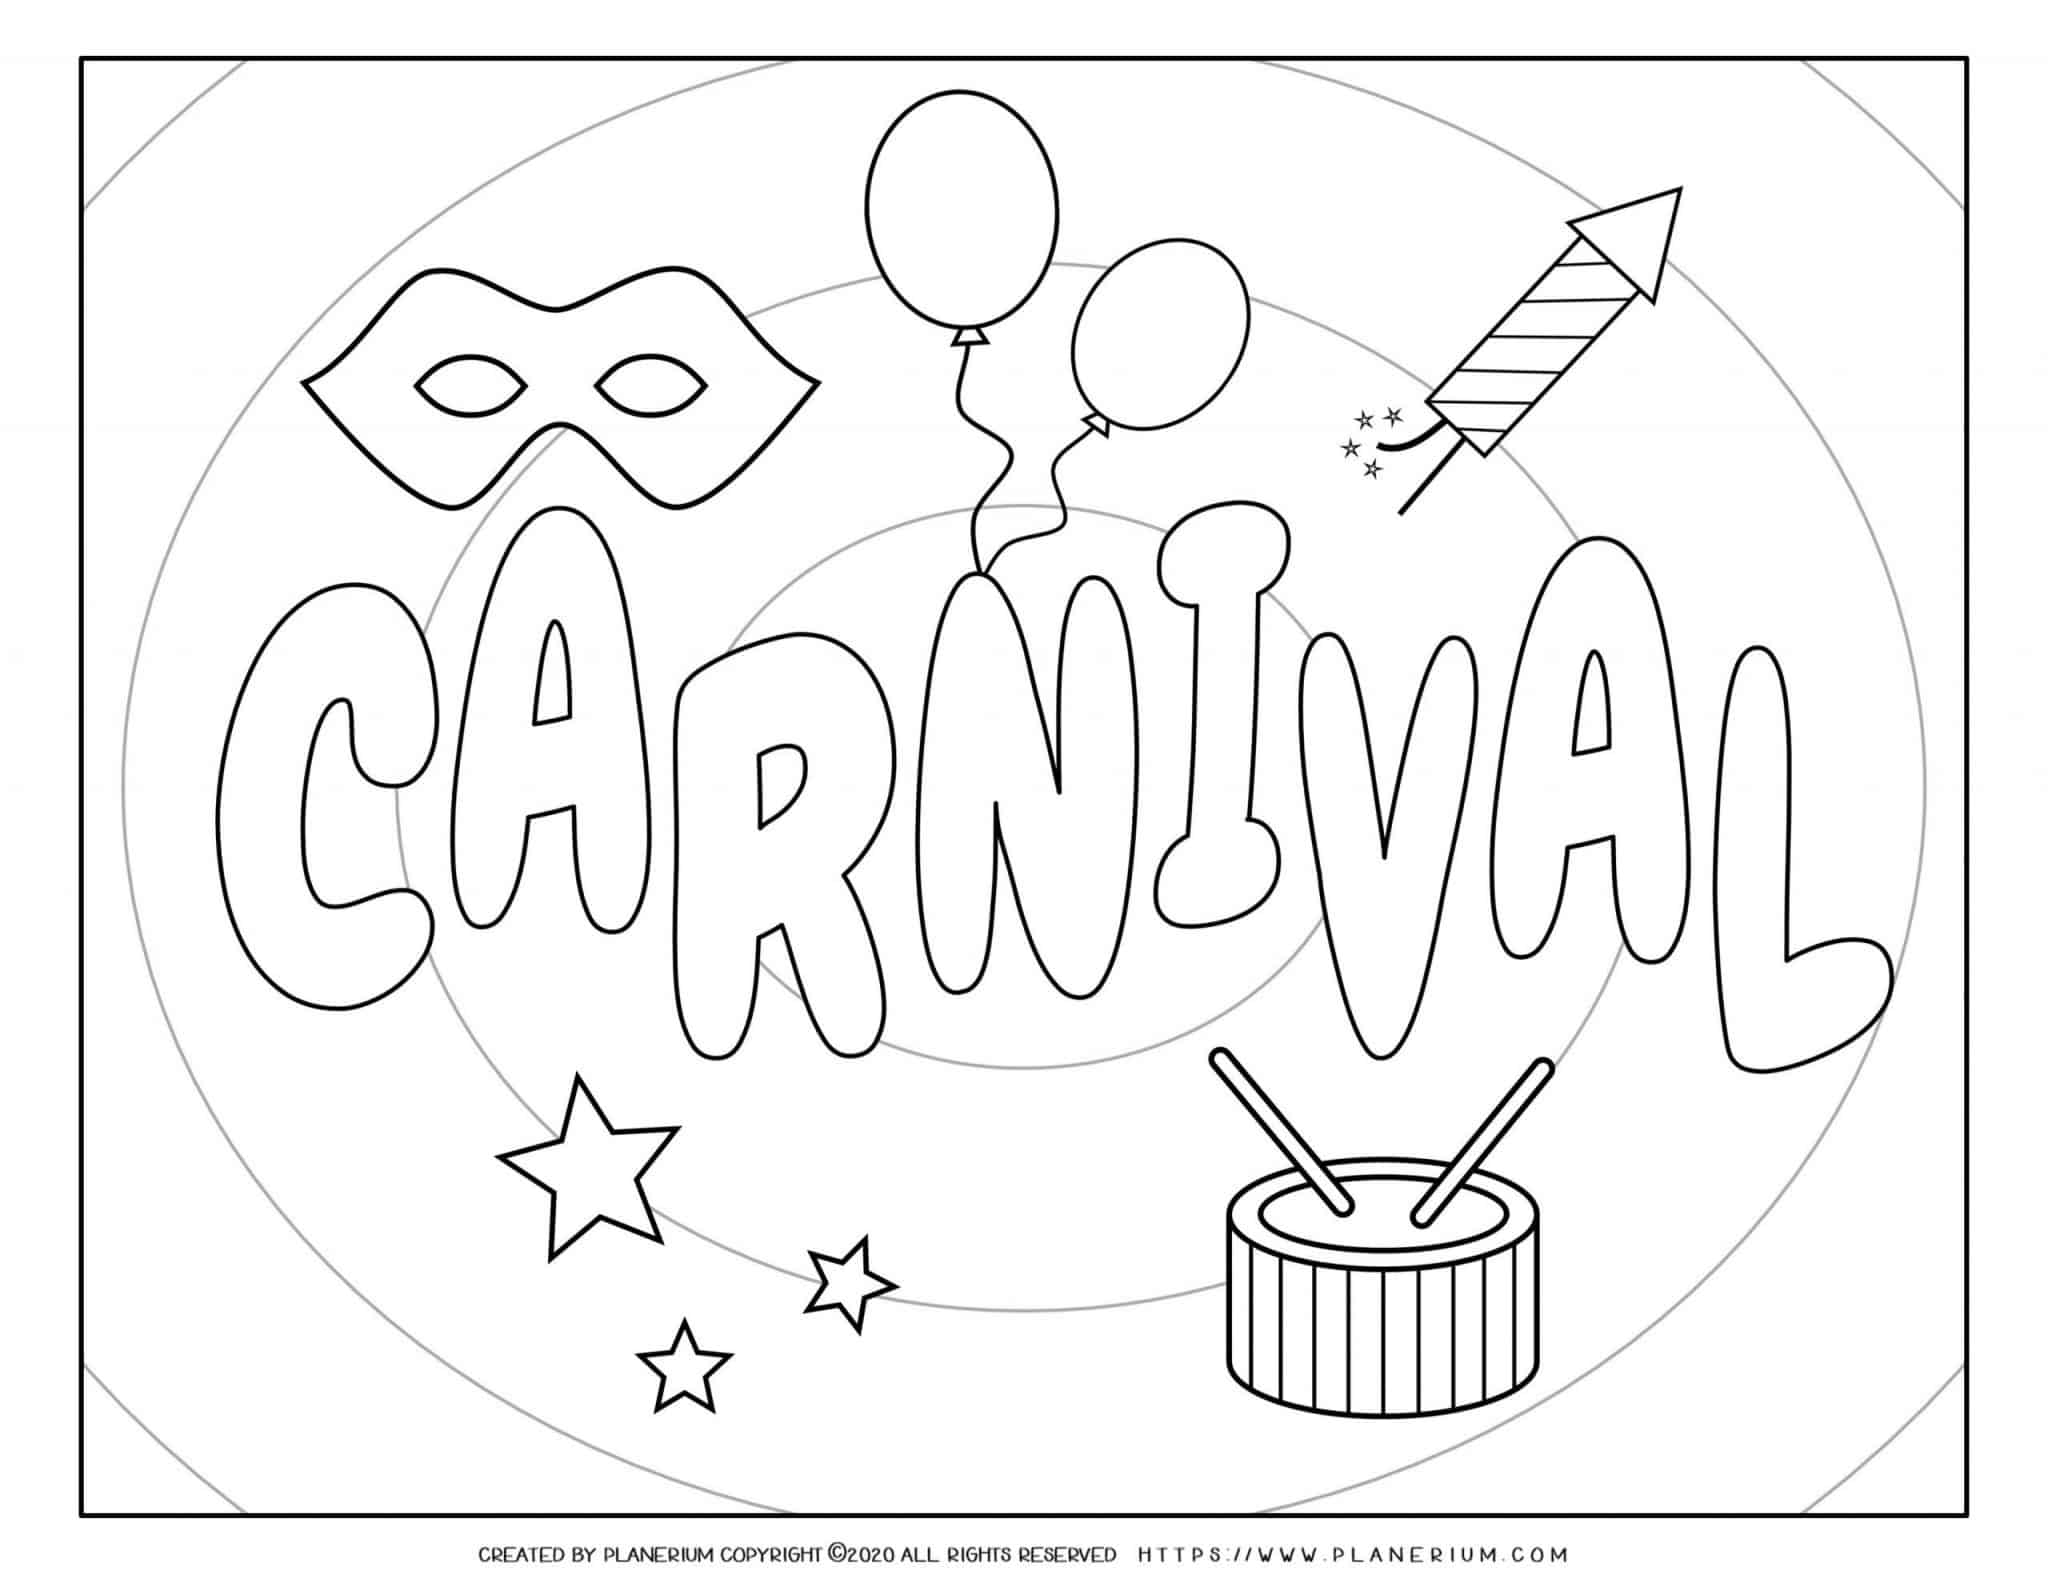 Carnival Coloring Page Free Printable Poster Planerium